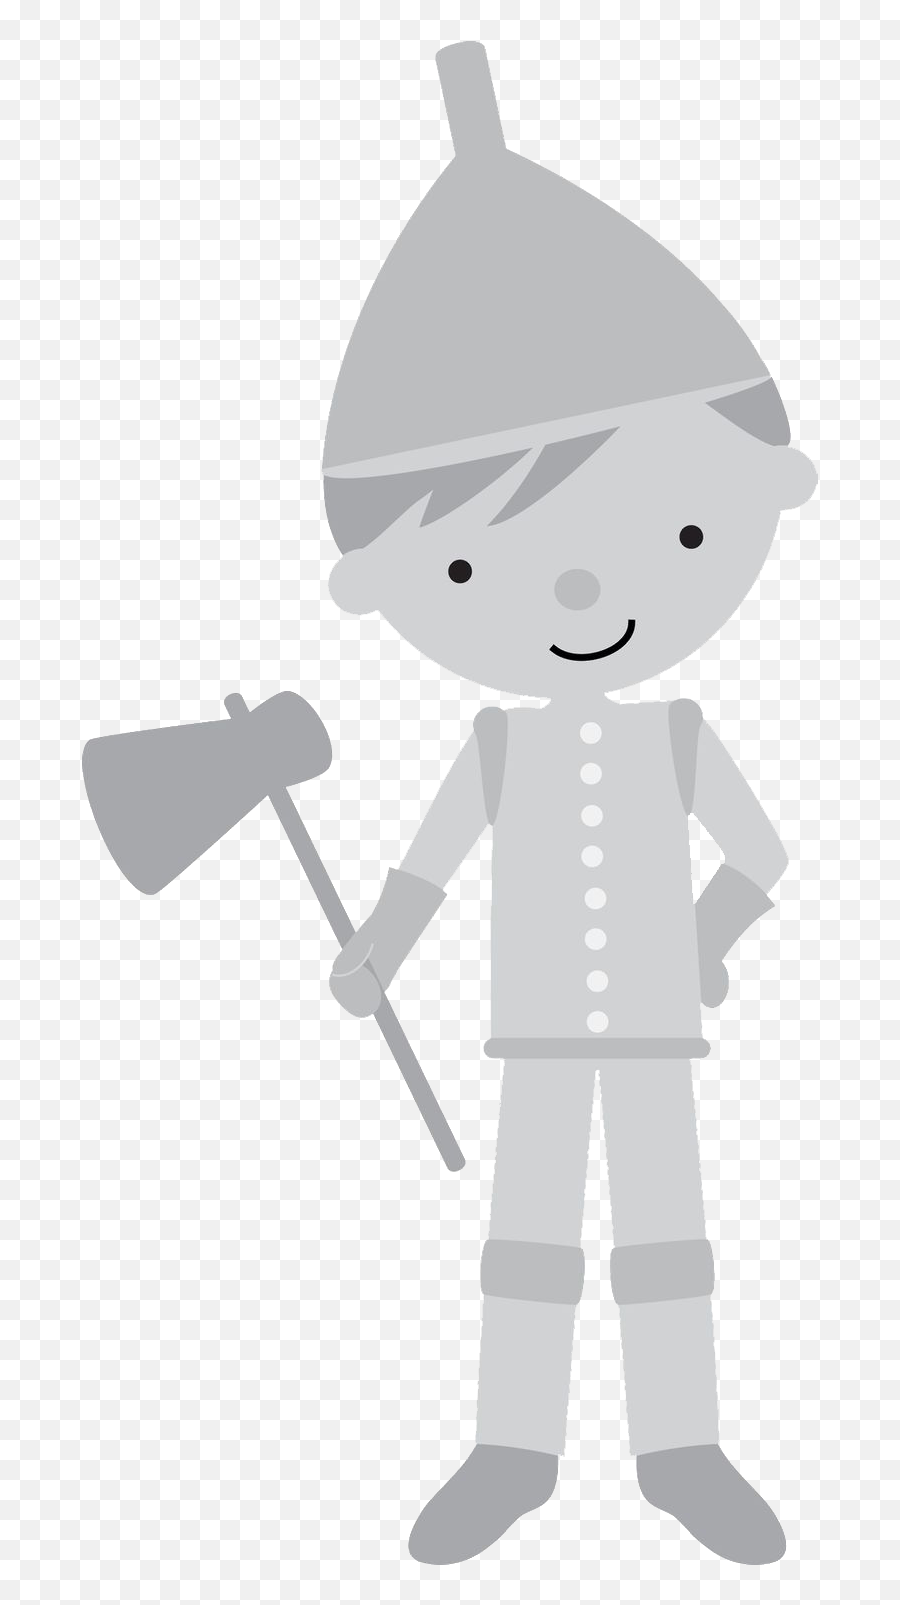 Is That Mr Scarecrow Behind The Barrels - Cute Wizard Of Oz Tin Man Emoji,Wizard Of Oz Clipart